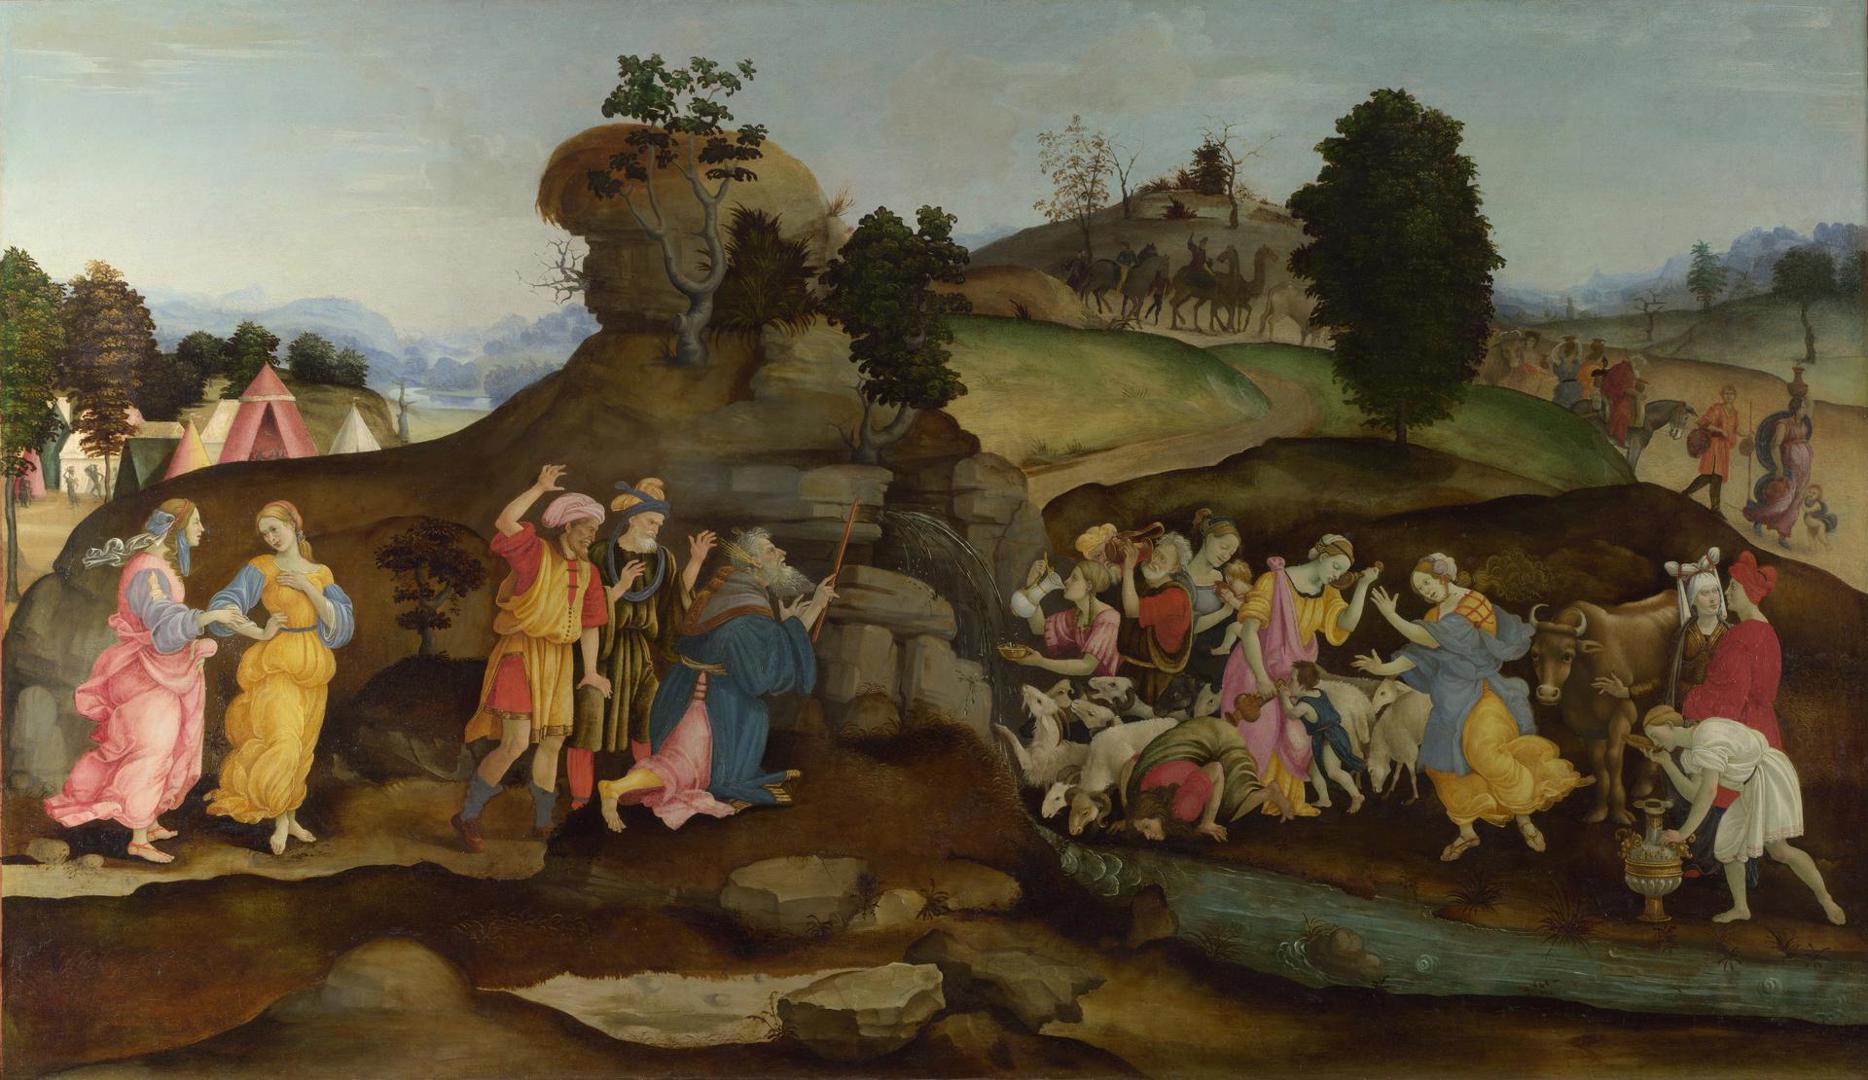 Moses brings forth Water out of the Rock by Follower of Filippino Lippi